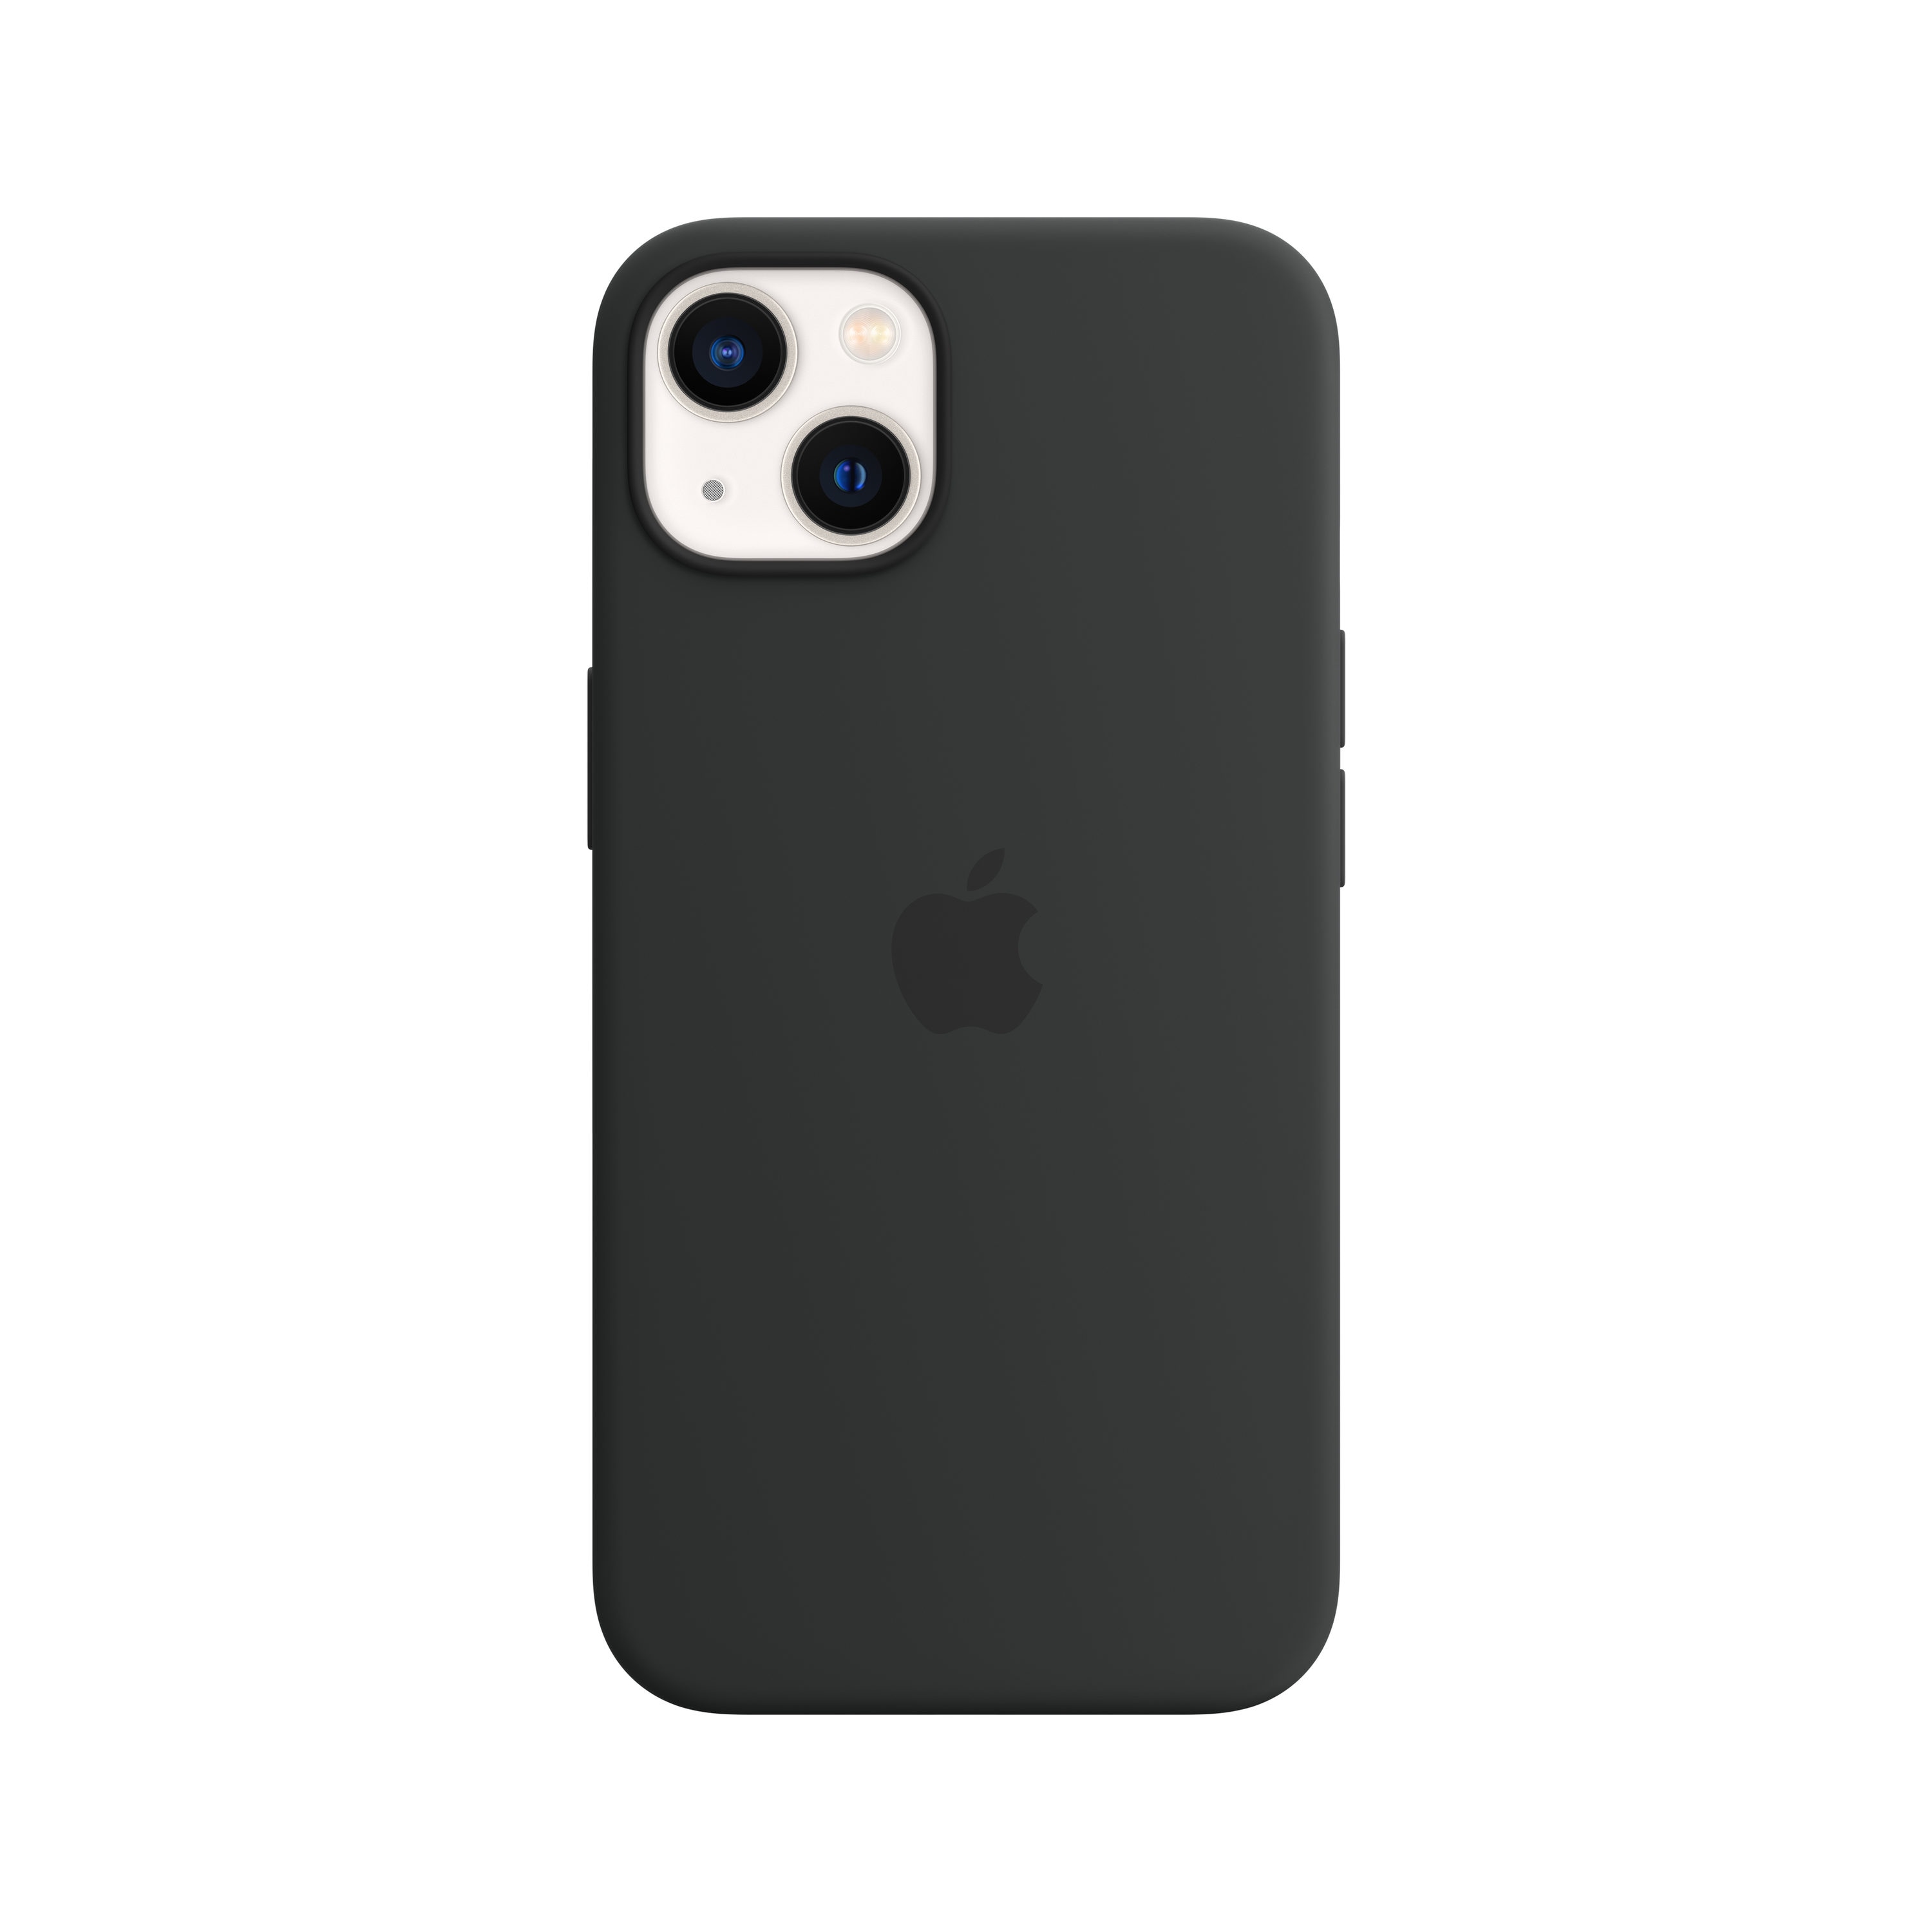 Apple iPhone 13 Case Roundup: Where To Buy Cases For The iPhone 13